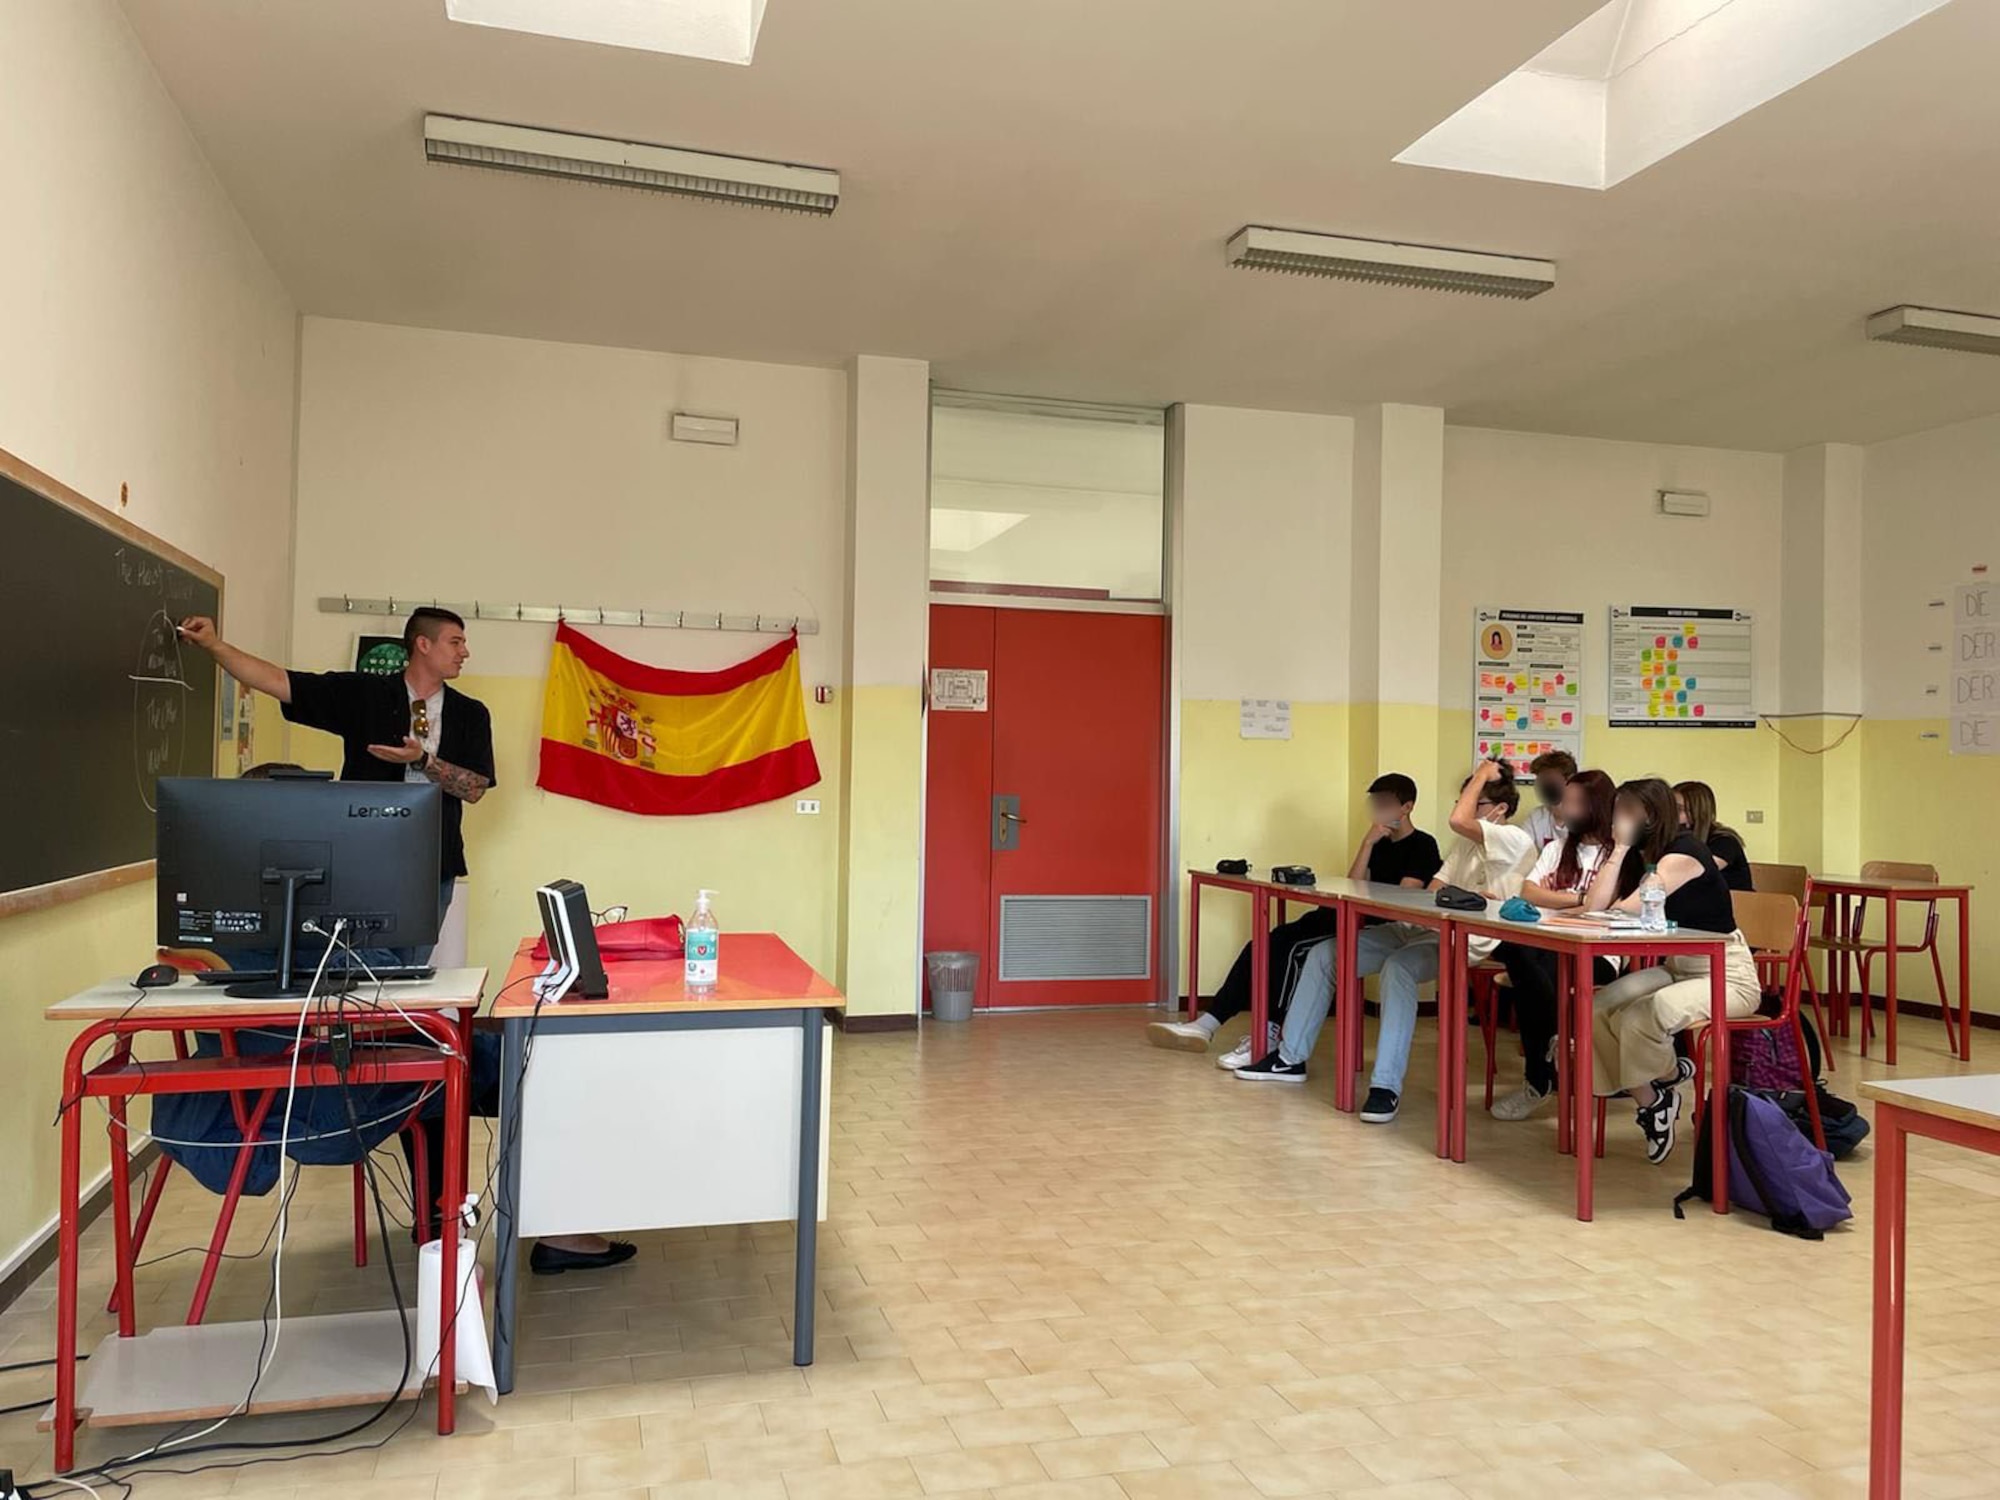 Airman 1st Class Conner Randolph, Vicini Americani English Teaching Program volunteer, teaches English to a high school class in a local city near Aviano Air Base, Italy. During the 2021-2022 school year, more than 49 volunteers taught 226 hours of English and some Spanish to 700 high school and middle school students over the course of 61 classes in a local city. The program is scheduled to continue into the 2022-2023 school year with plans to also reach elementary schools. (U.S. Air Force photo by Senior Airman Brooke Moeder)